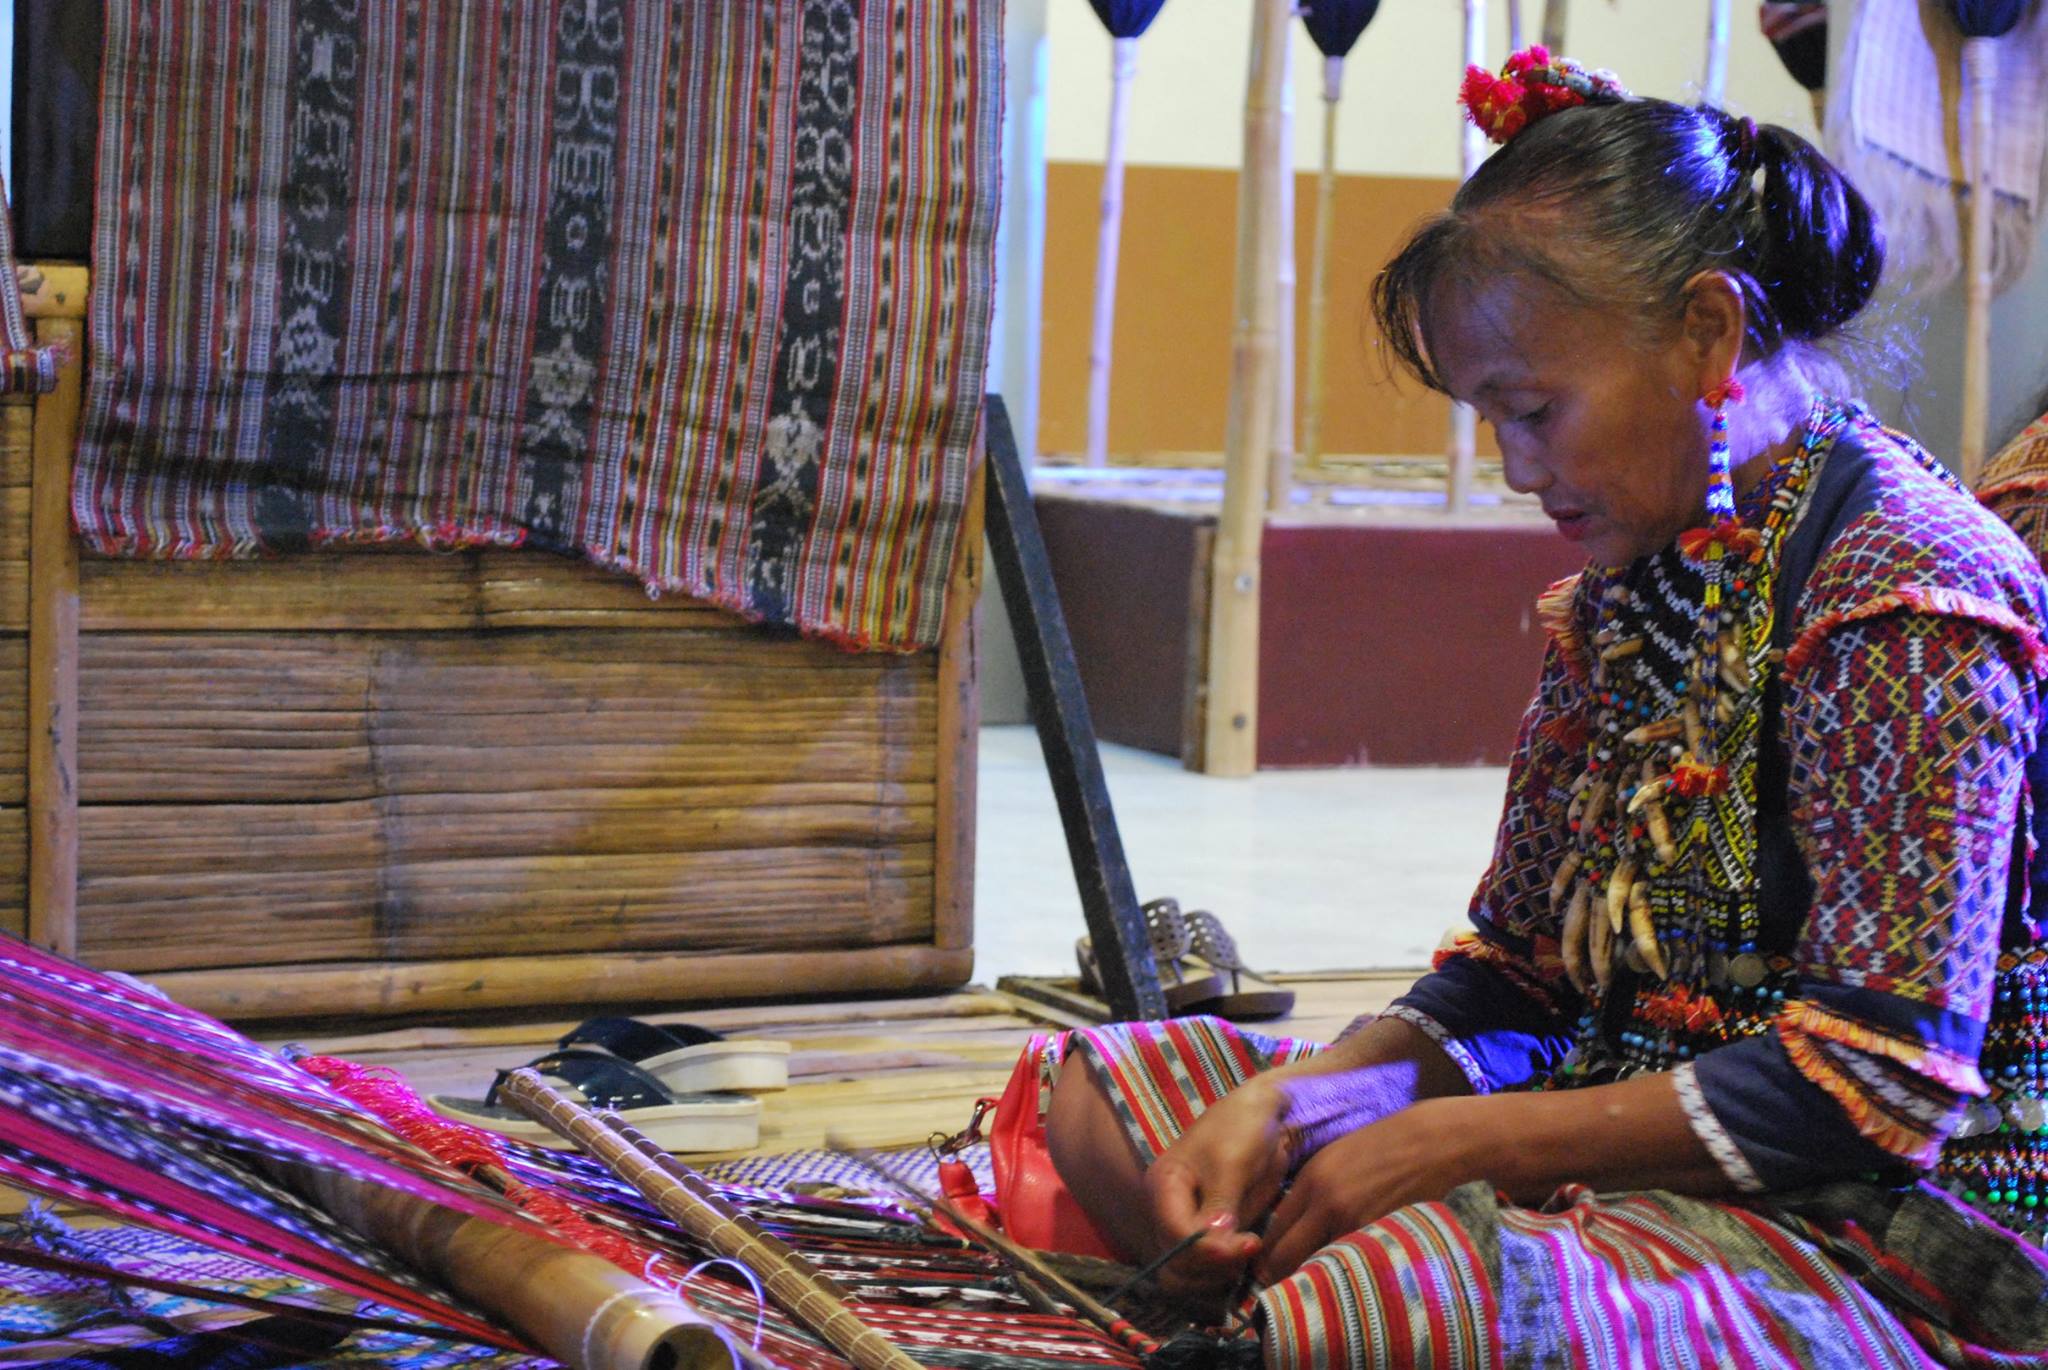 Photo shows one of the weavers from BIMP region with her weaving at Budayaw Festival 2017.